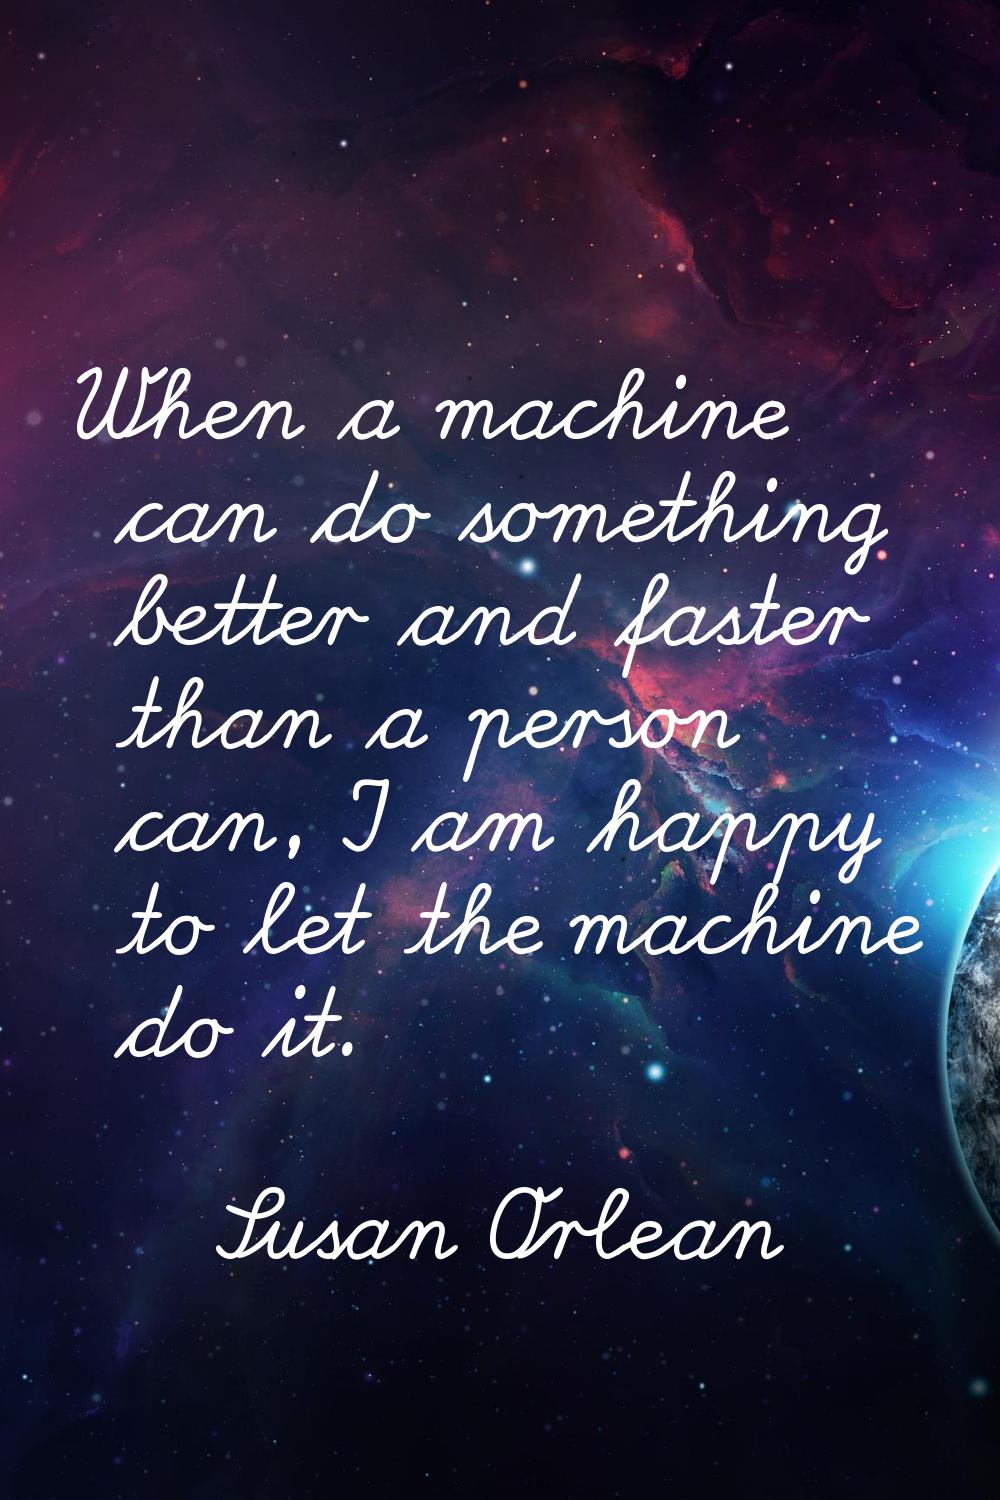 When a machine can do something better and faster than a person can, I am happy to let the machine 